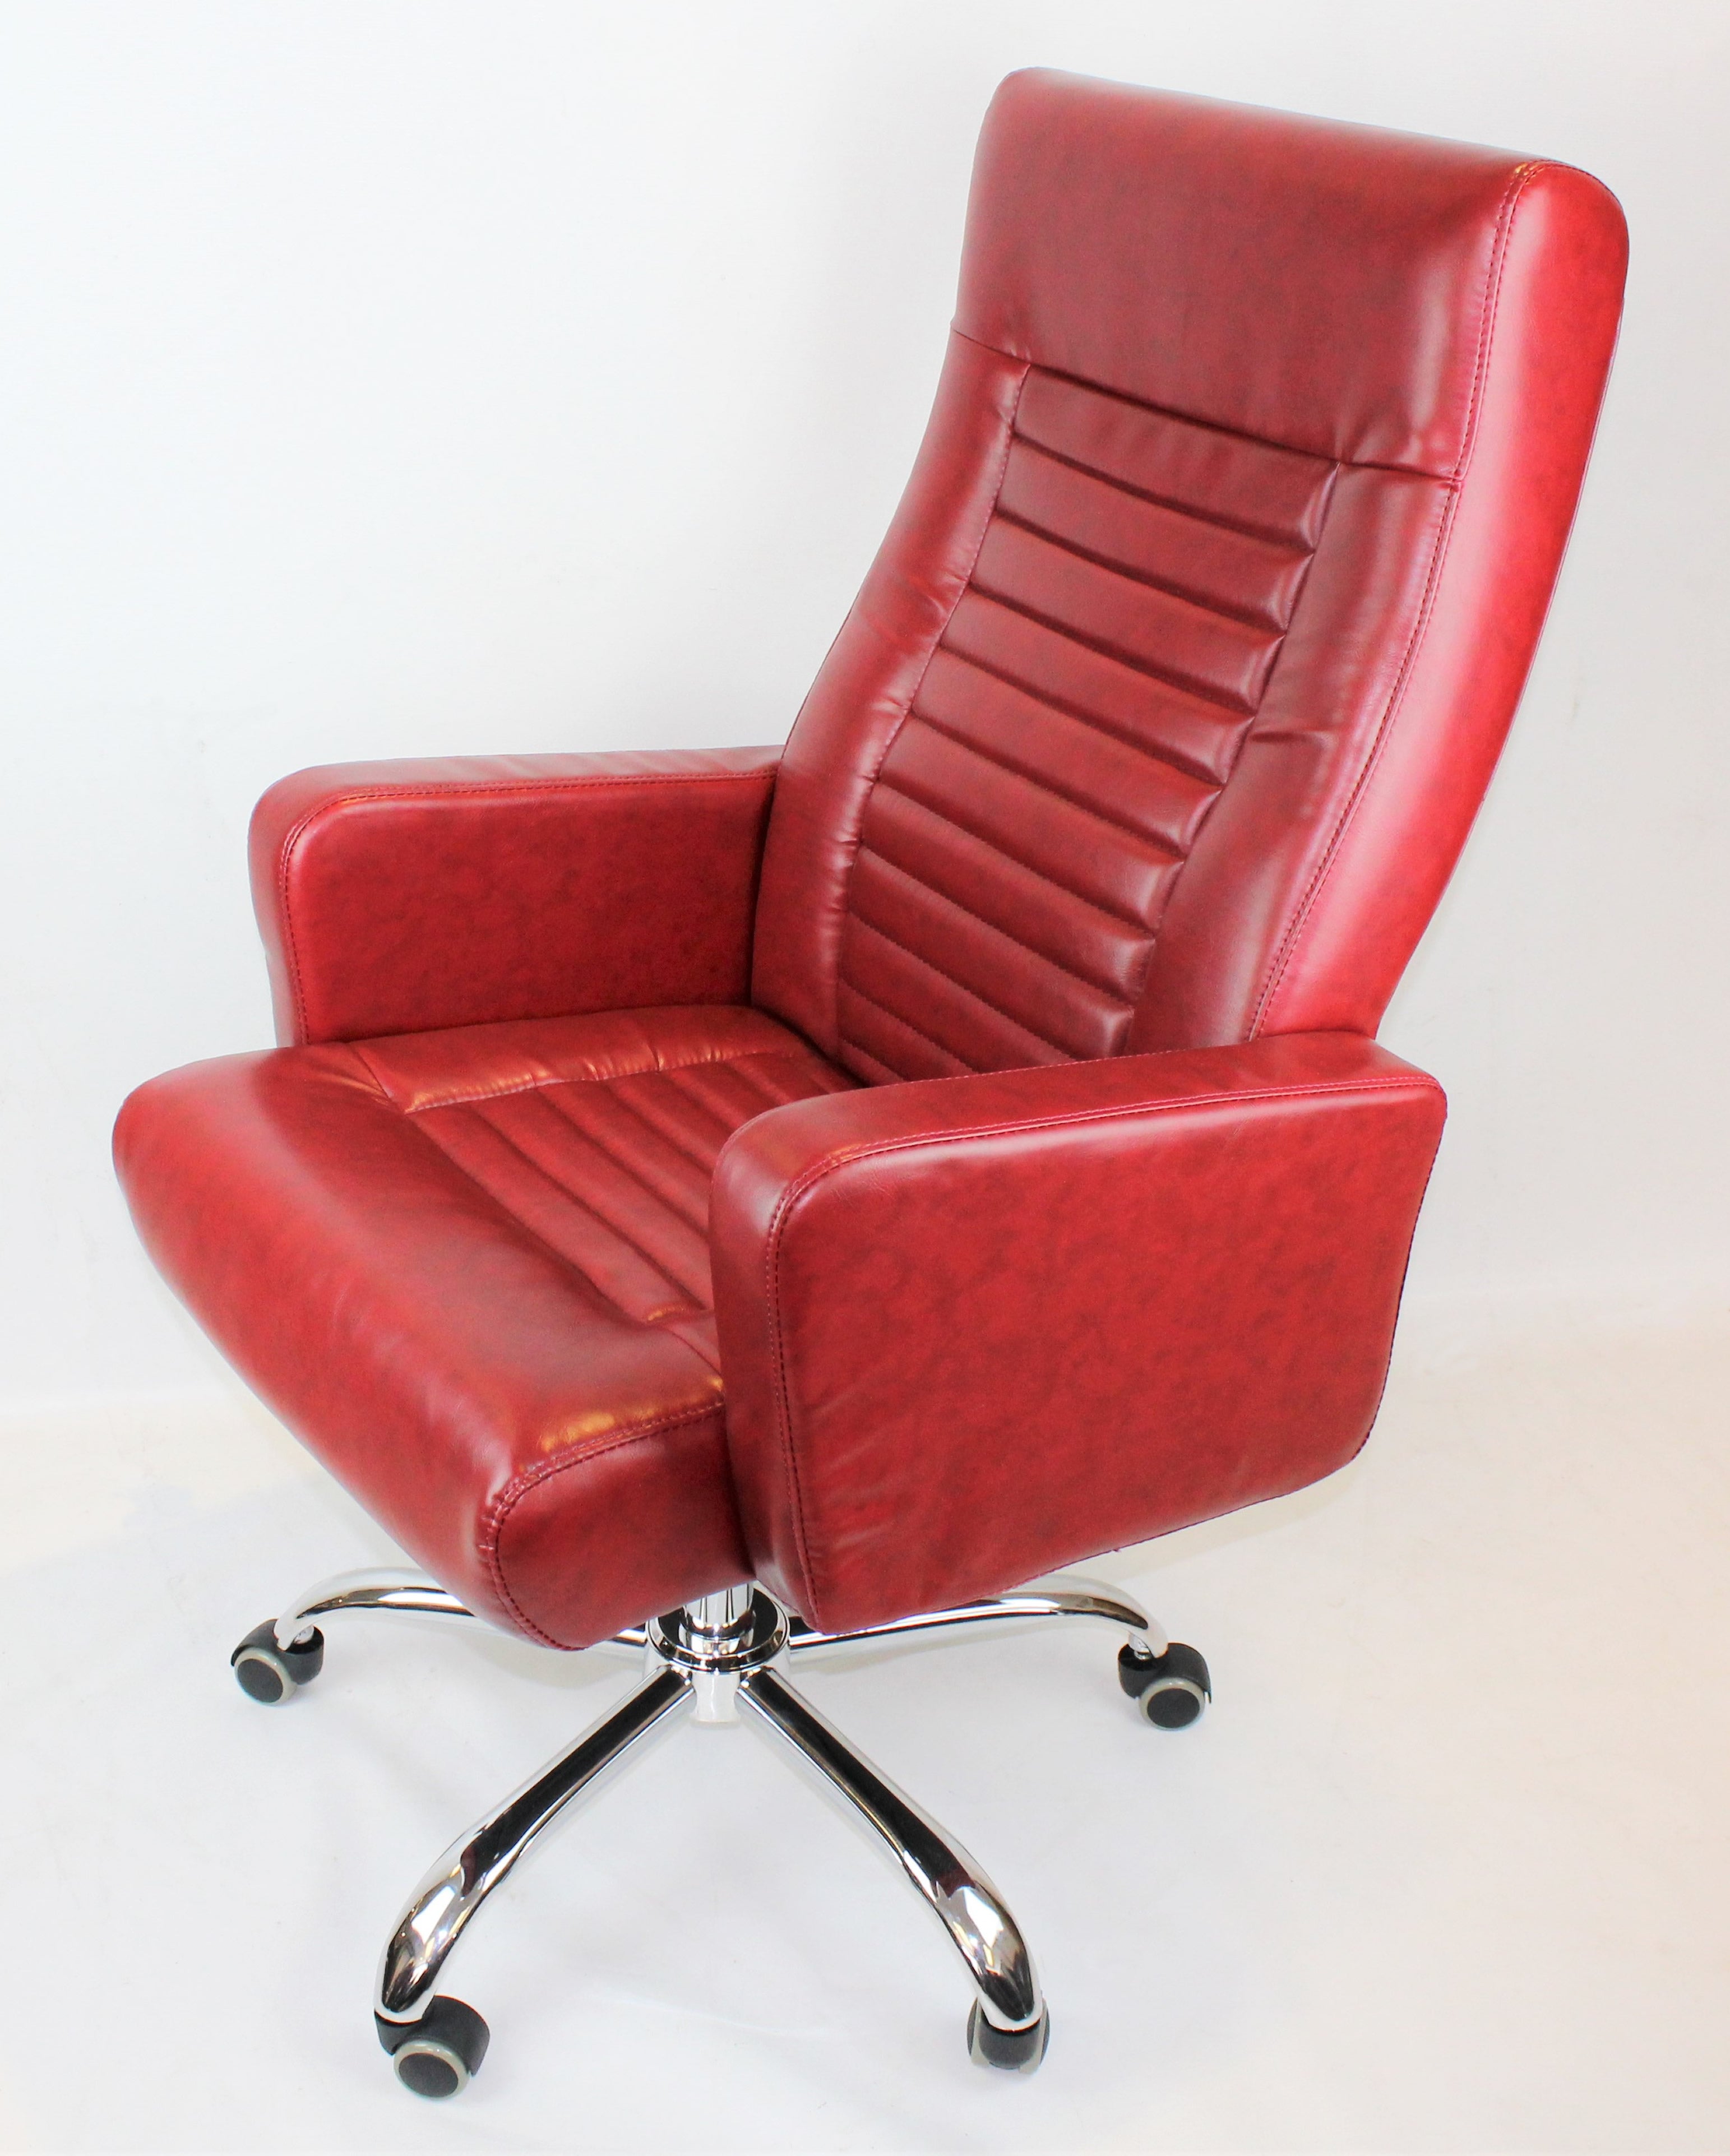 Modern Red Leather Executive Office Chair - DH-009